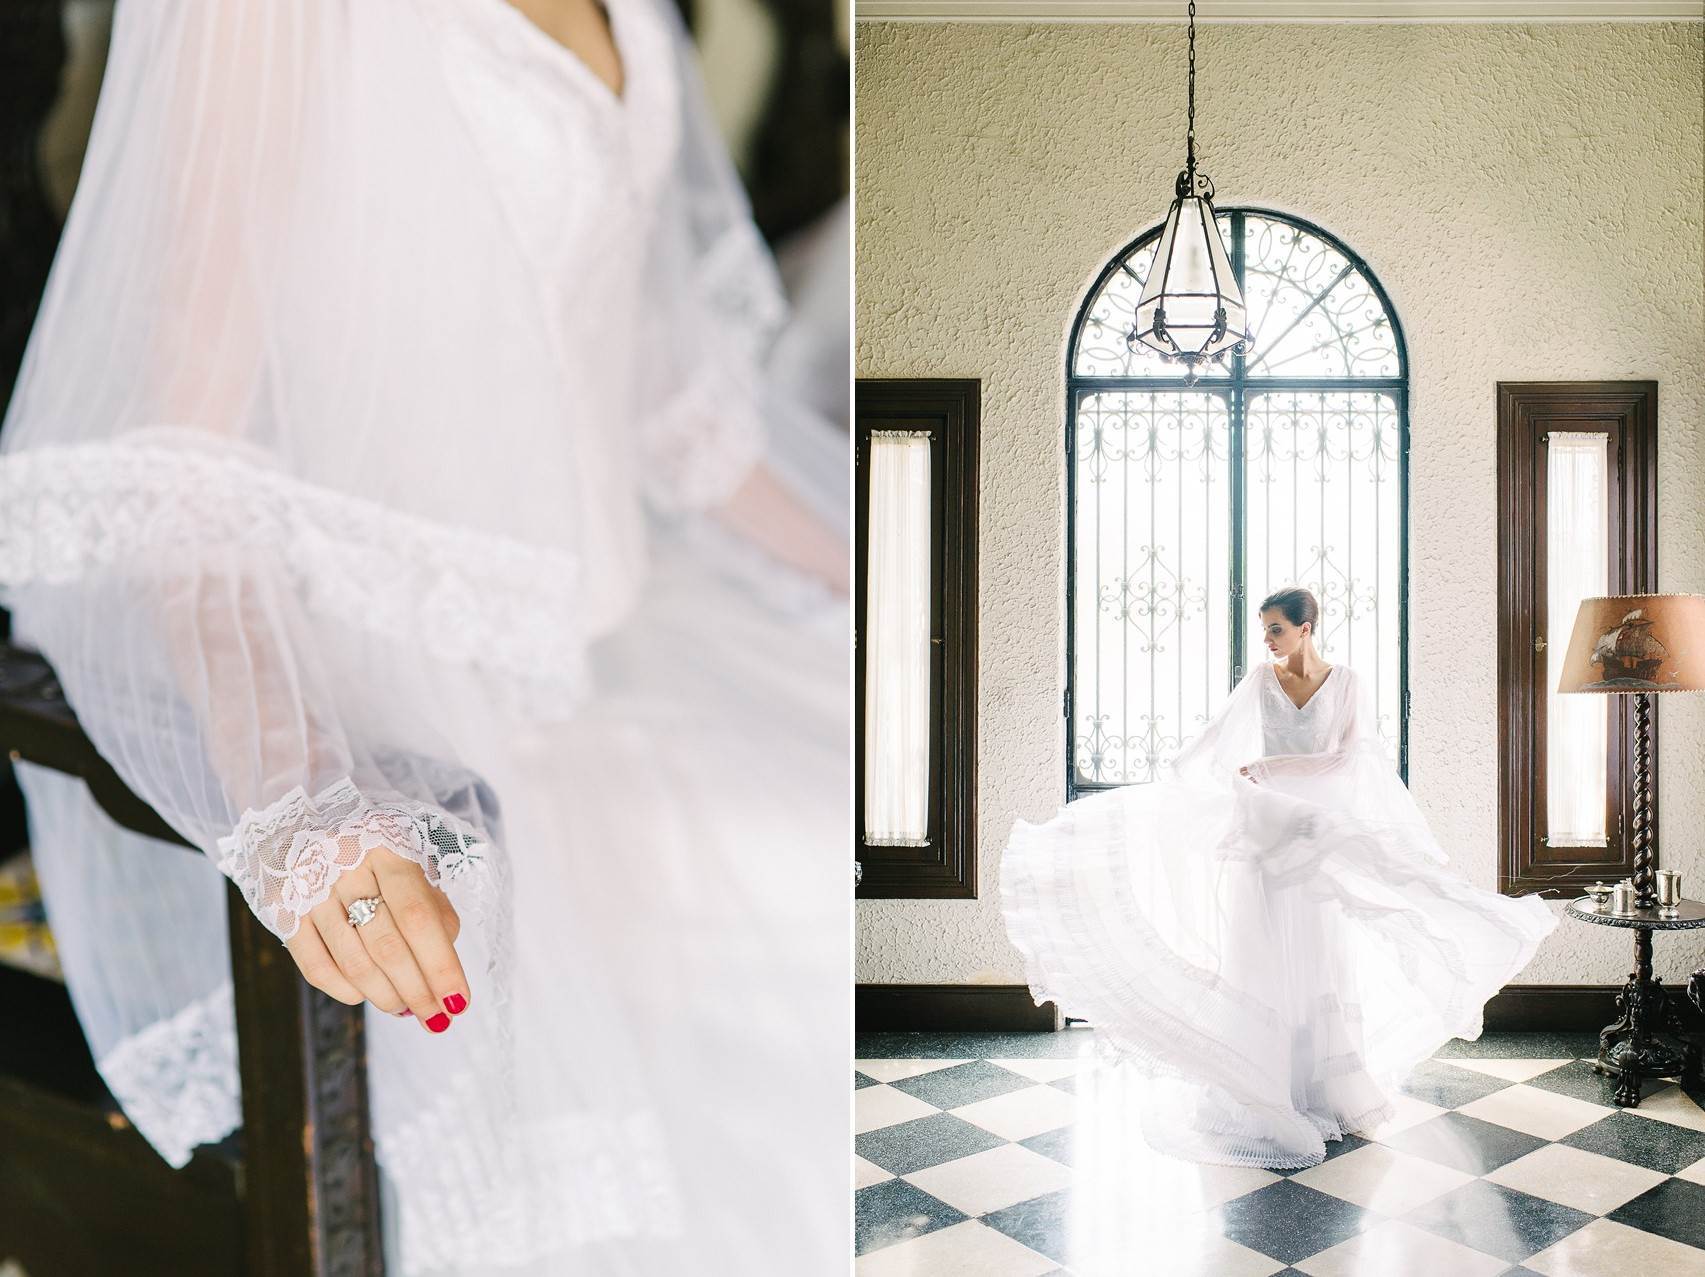 Vintage Inspired Bride - A Breathtaking Colonial Wedding Styled Shoot in Lima